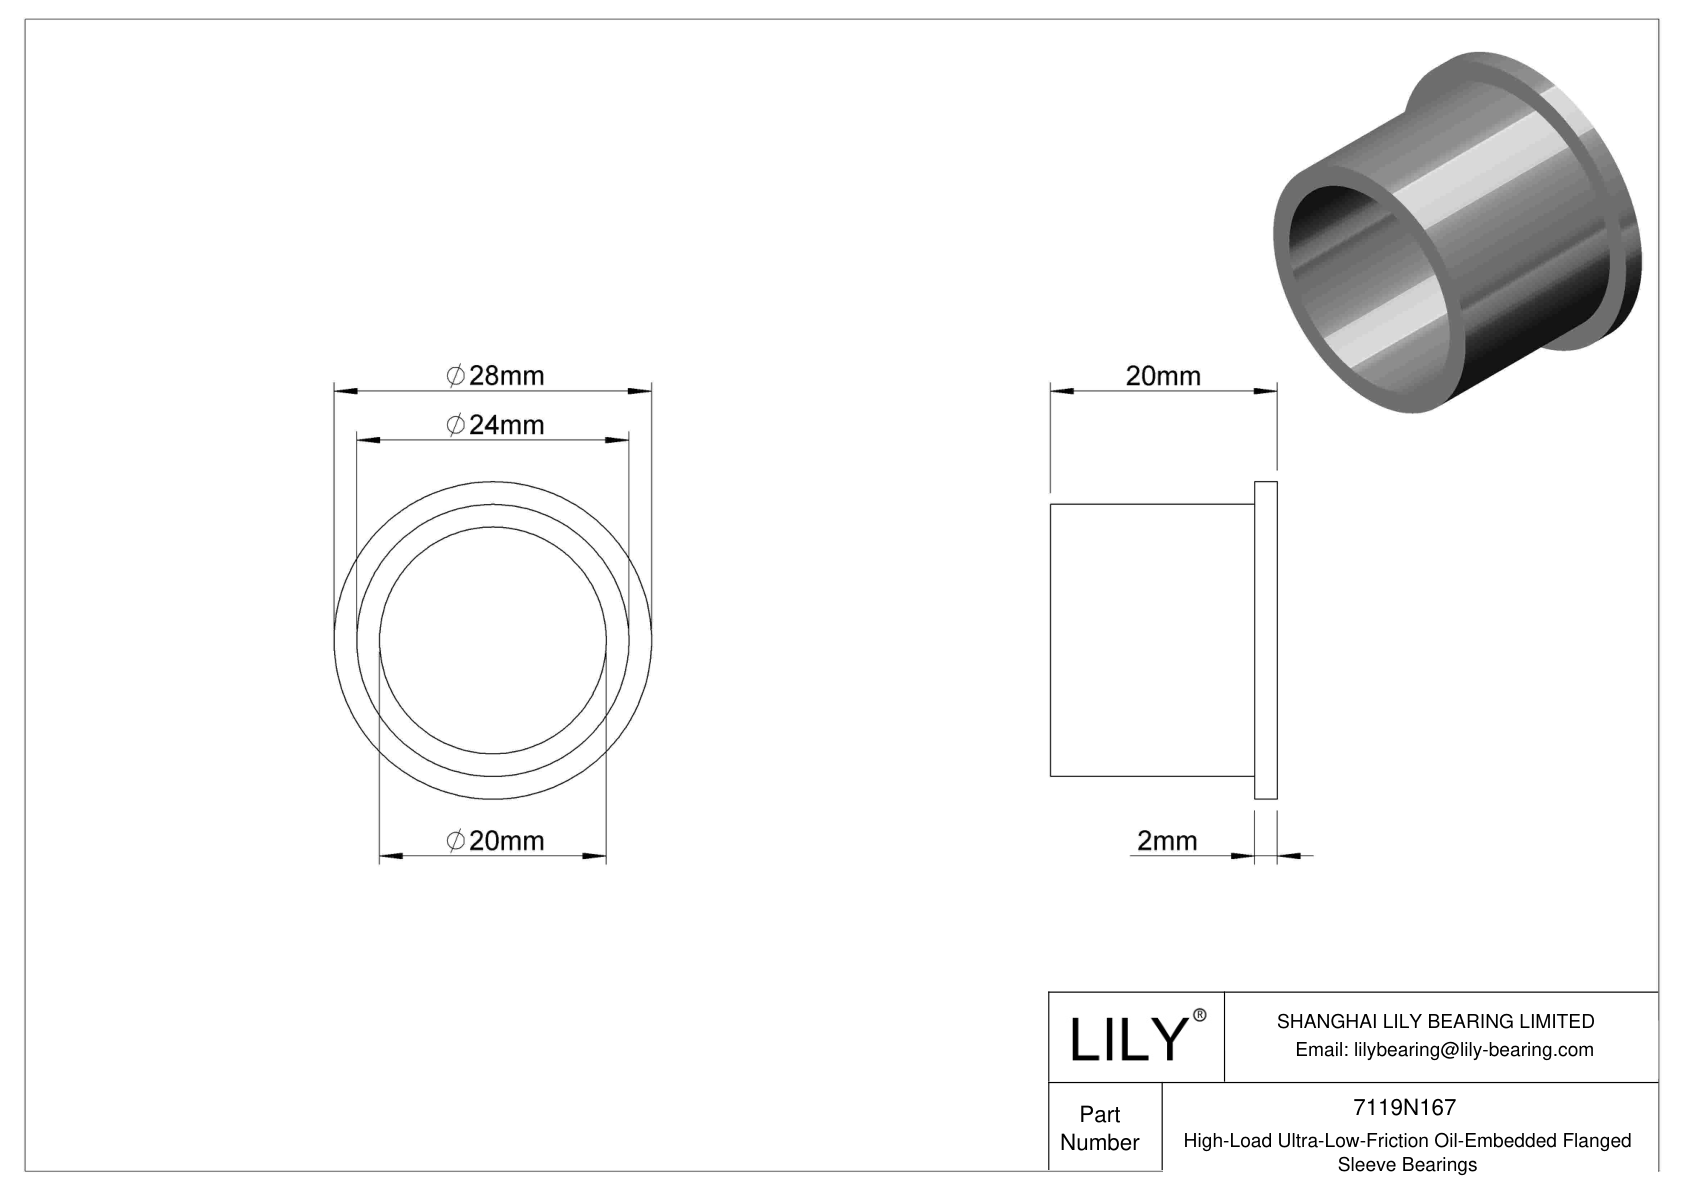 HBBJNBGH High-Load Ultra-Low-Friction Oil-Embedded Flanged Sleeve Bearings cad drawing